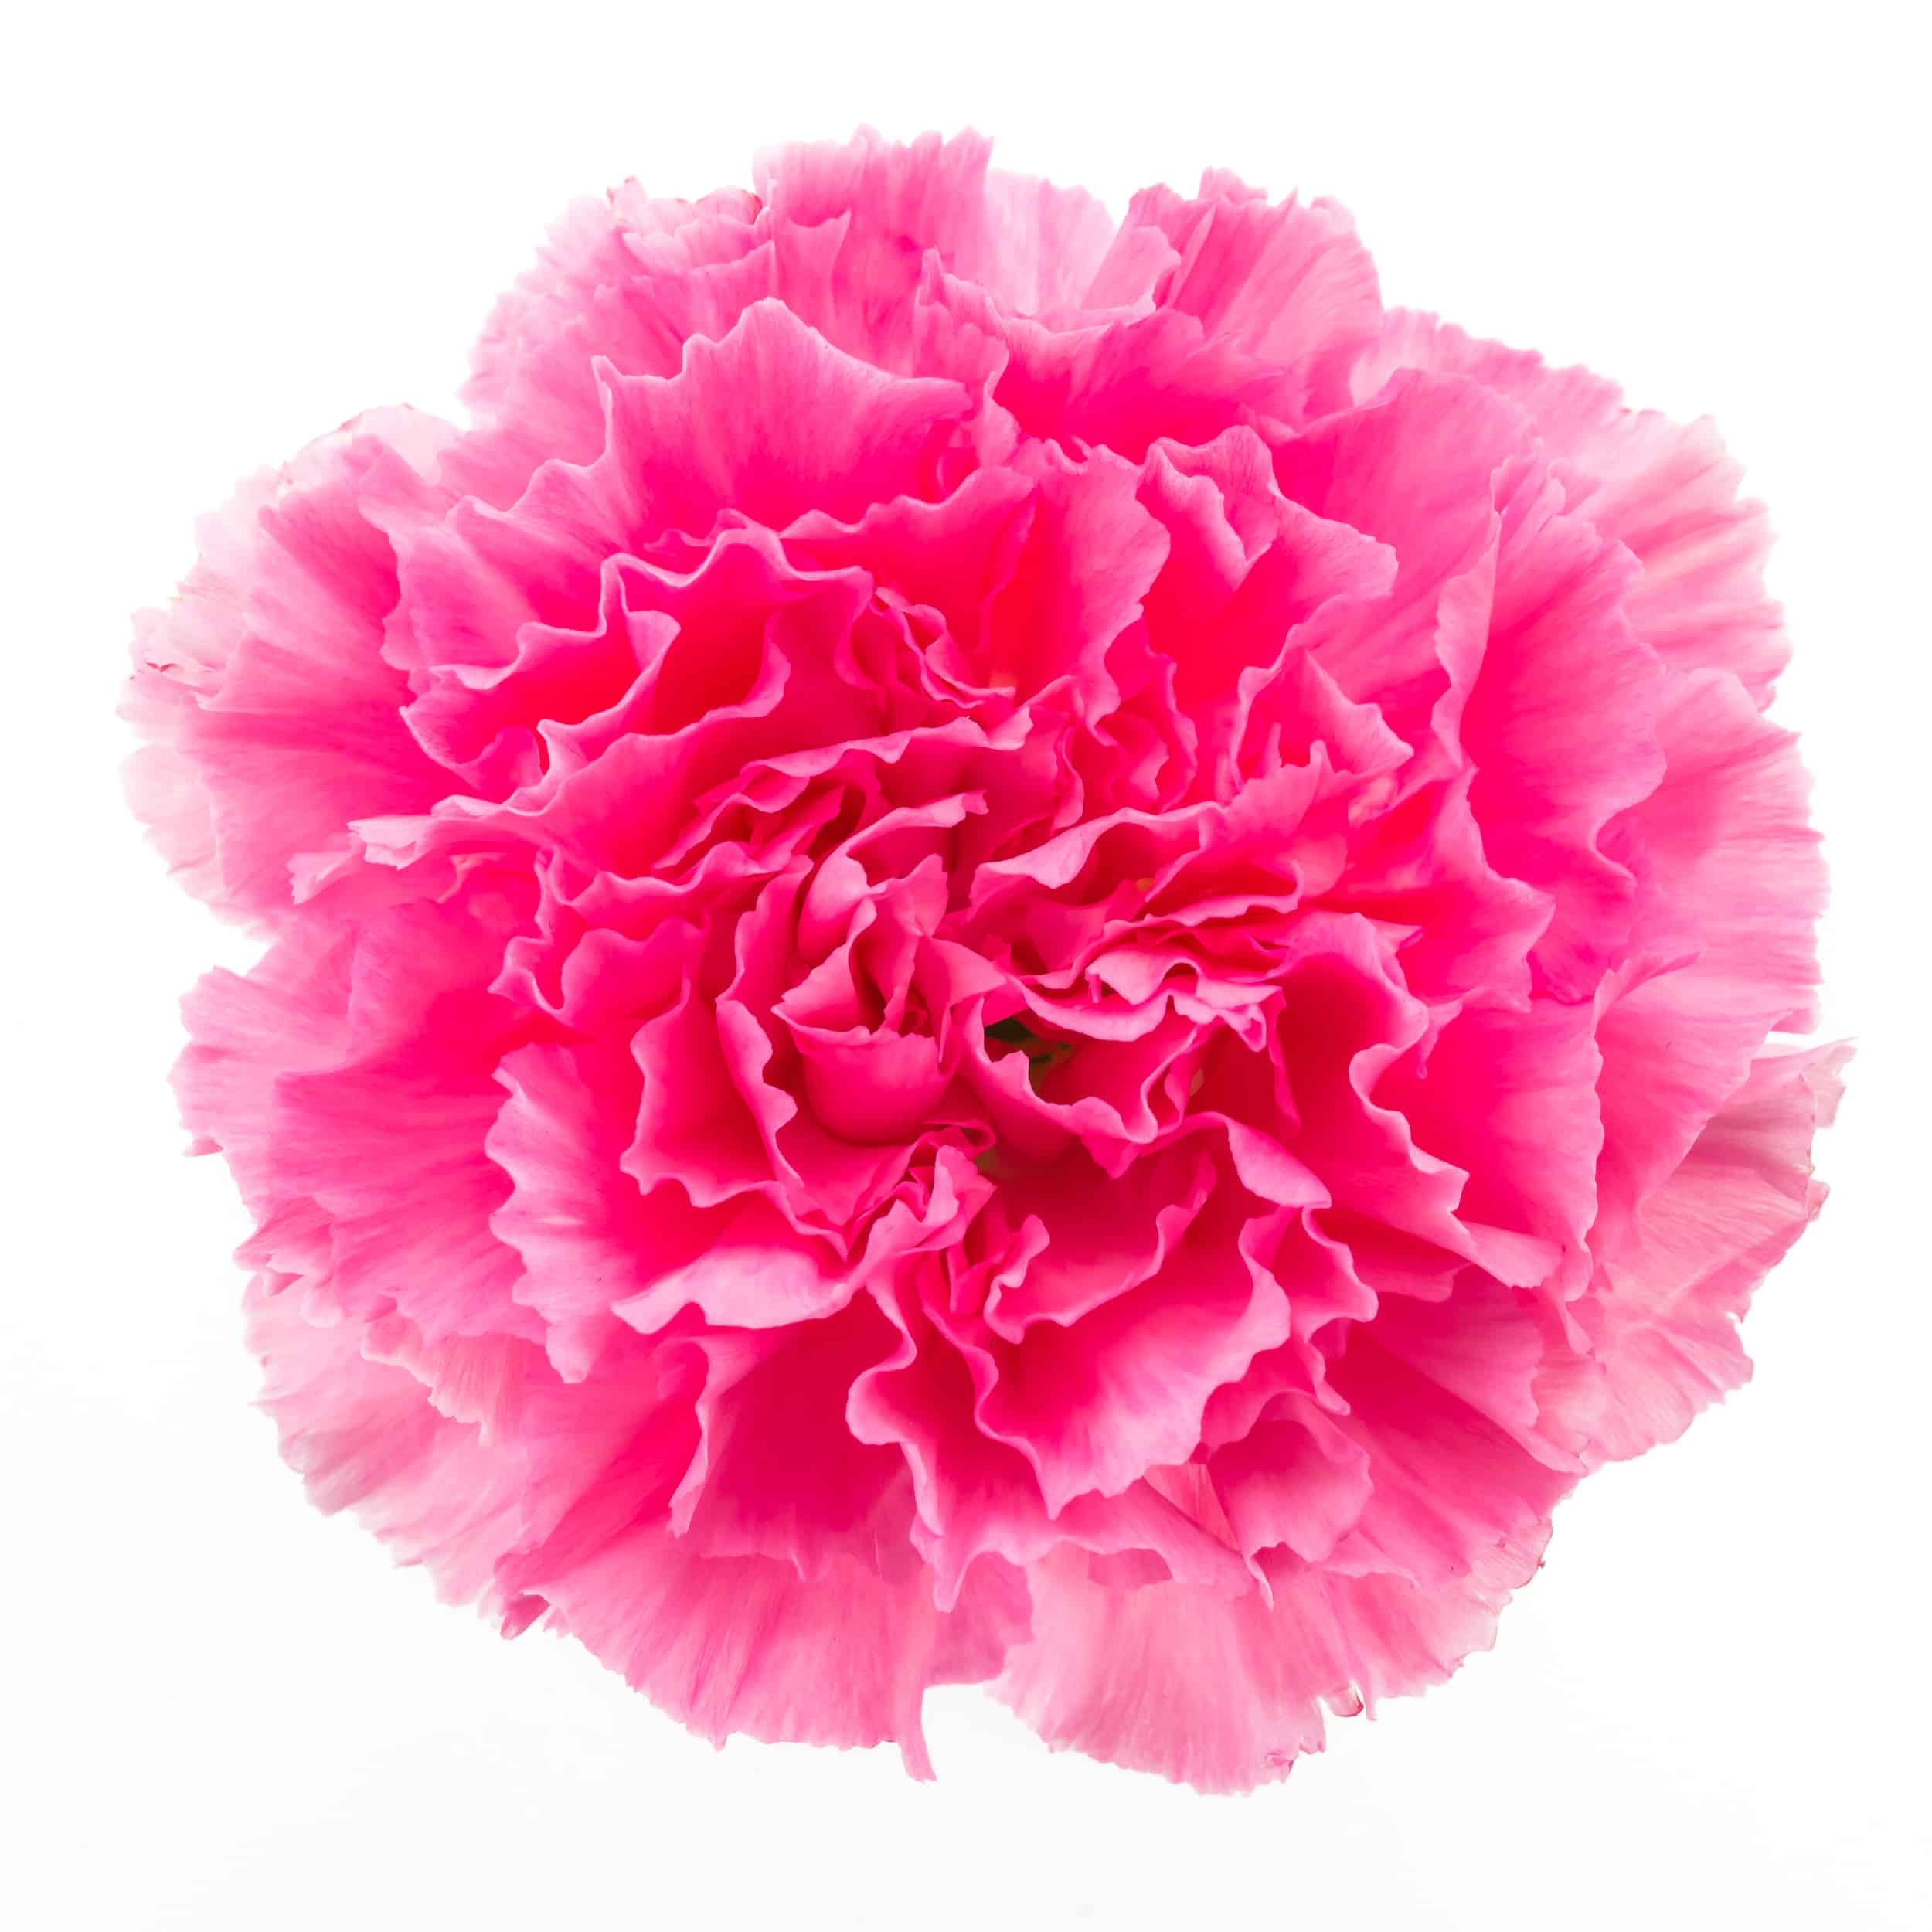 Pink flower isolated on white background